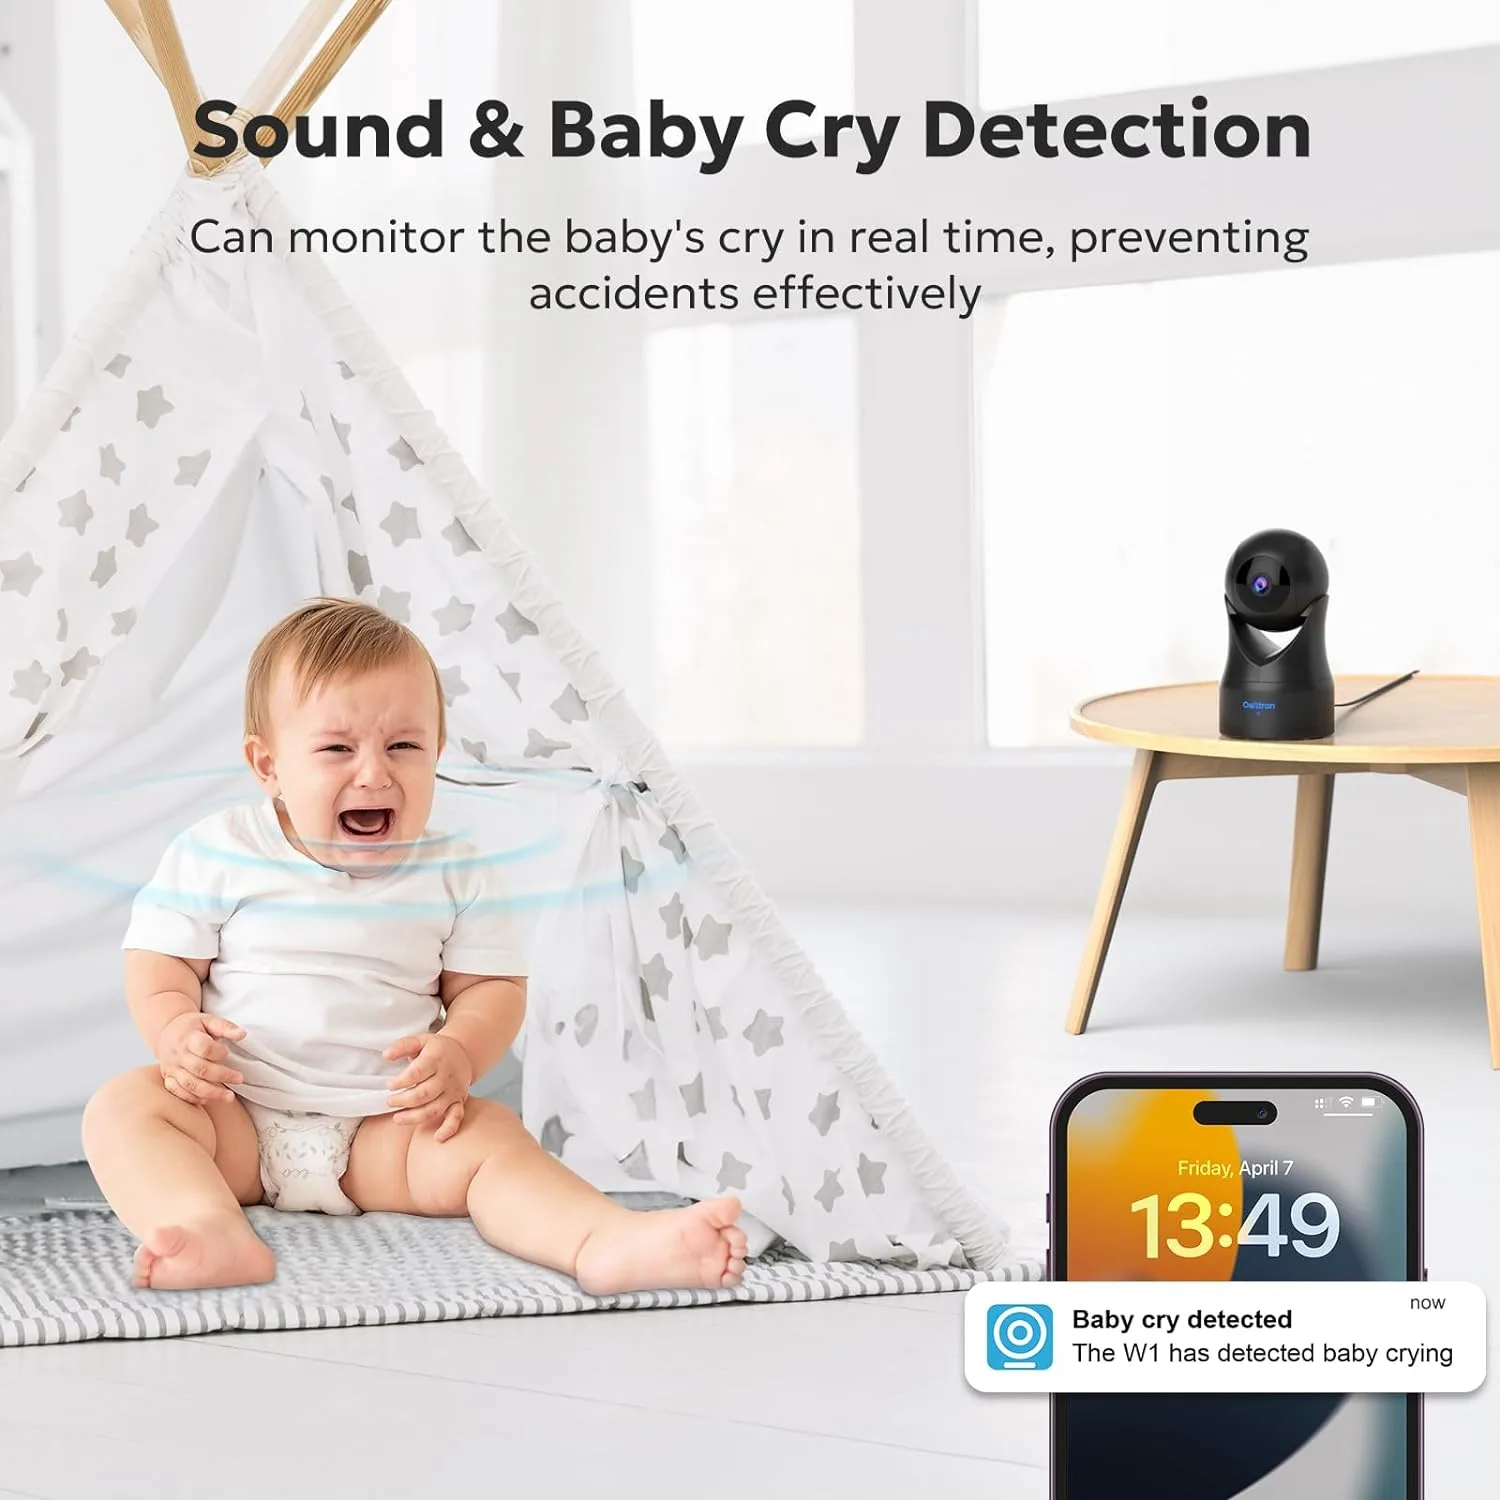 Owltron's sound and baby cry detection